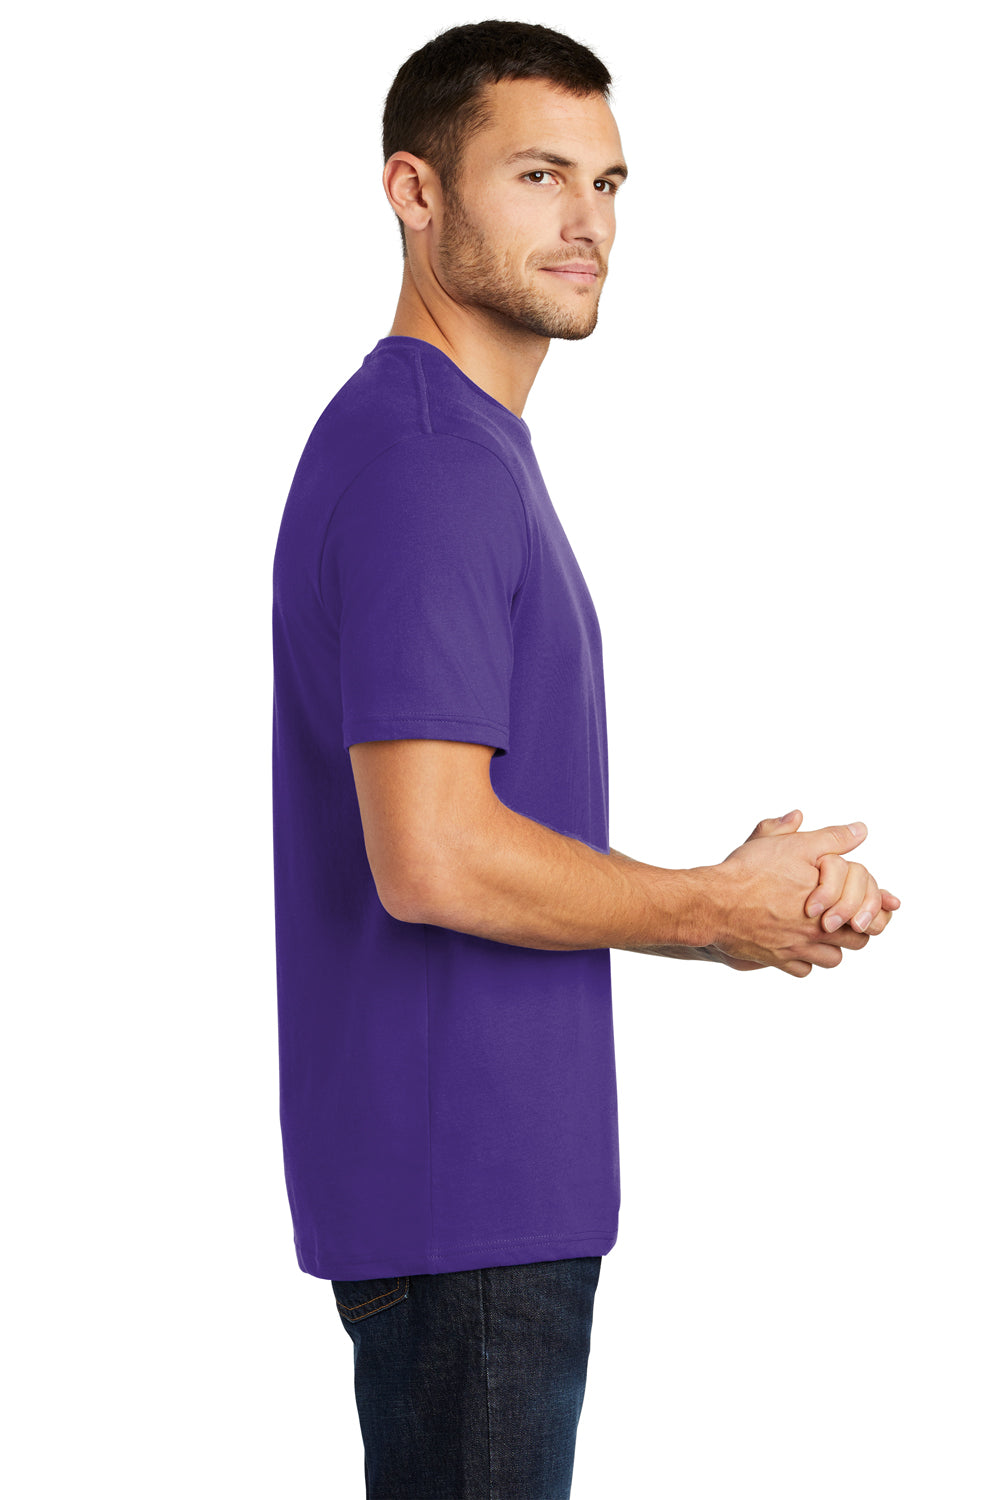 District DT104 Mens Perfect Weight Short Sleeve Crewneck T-Shirt Purple Side